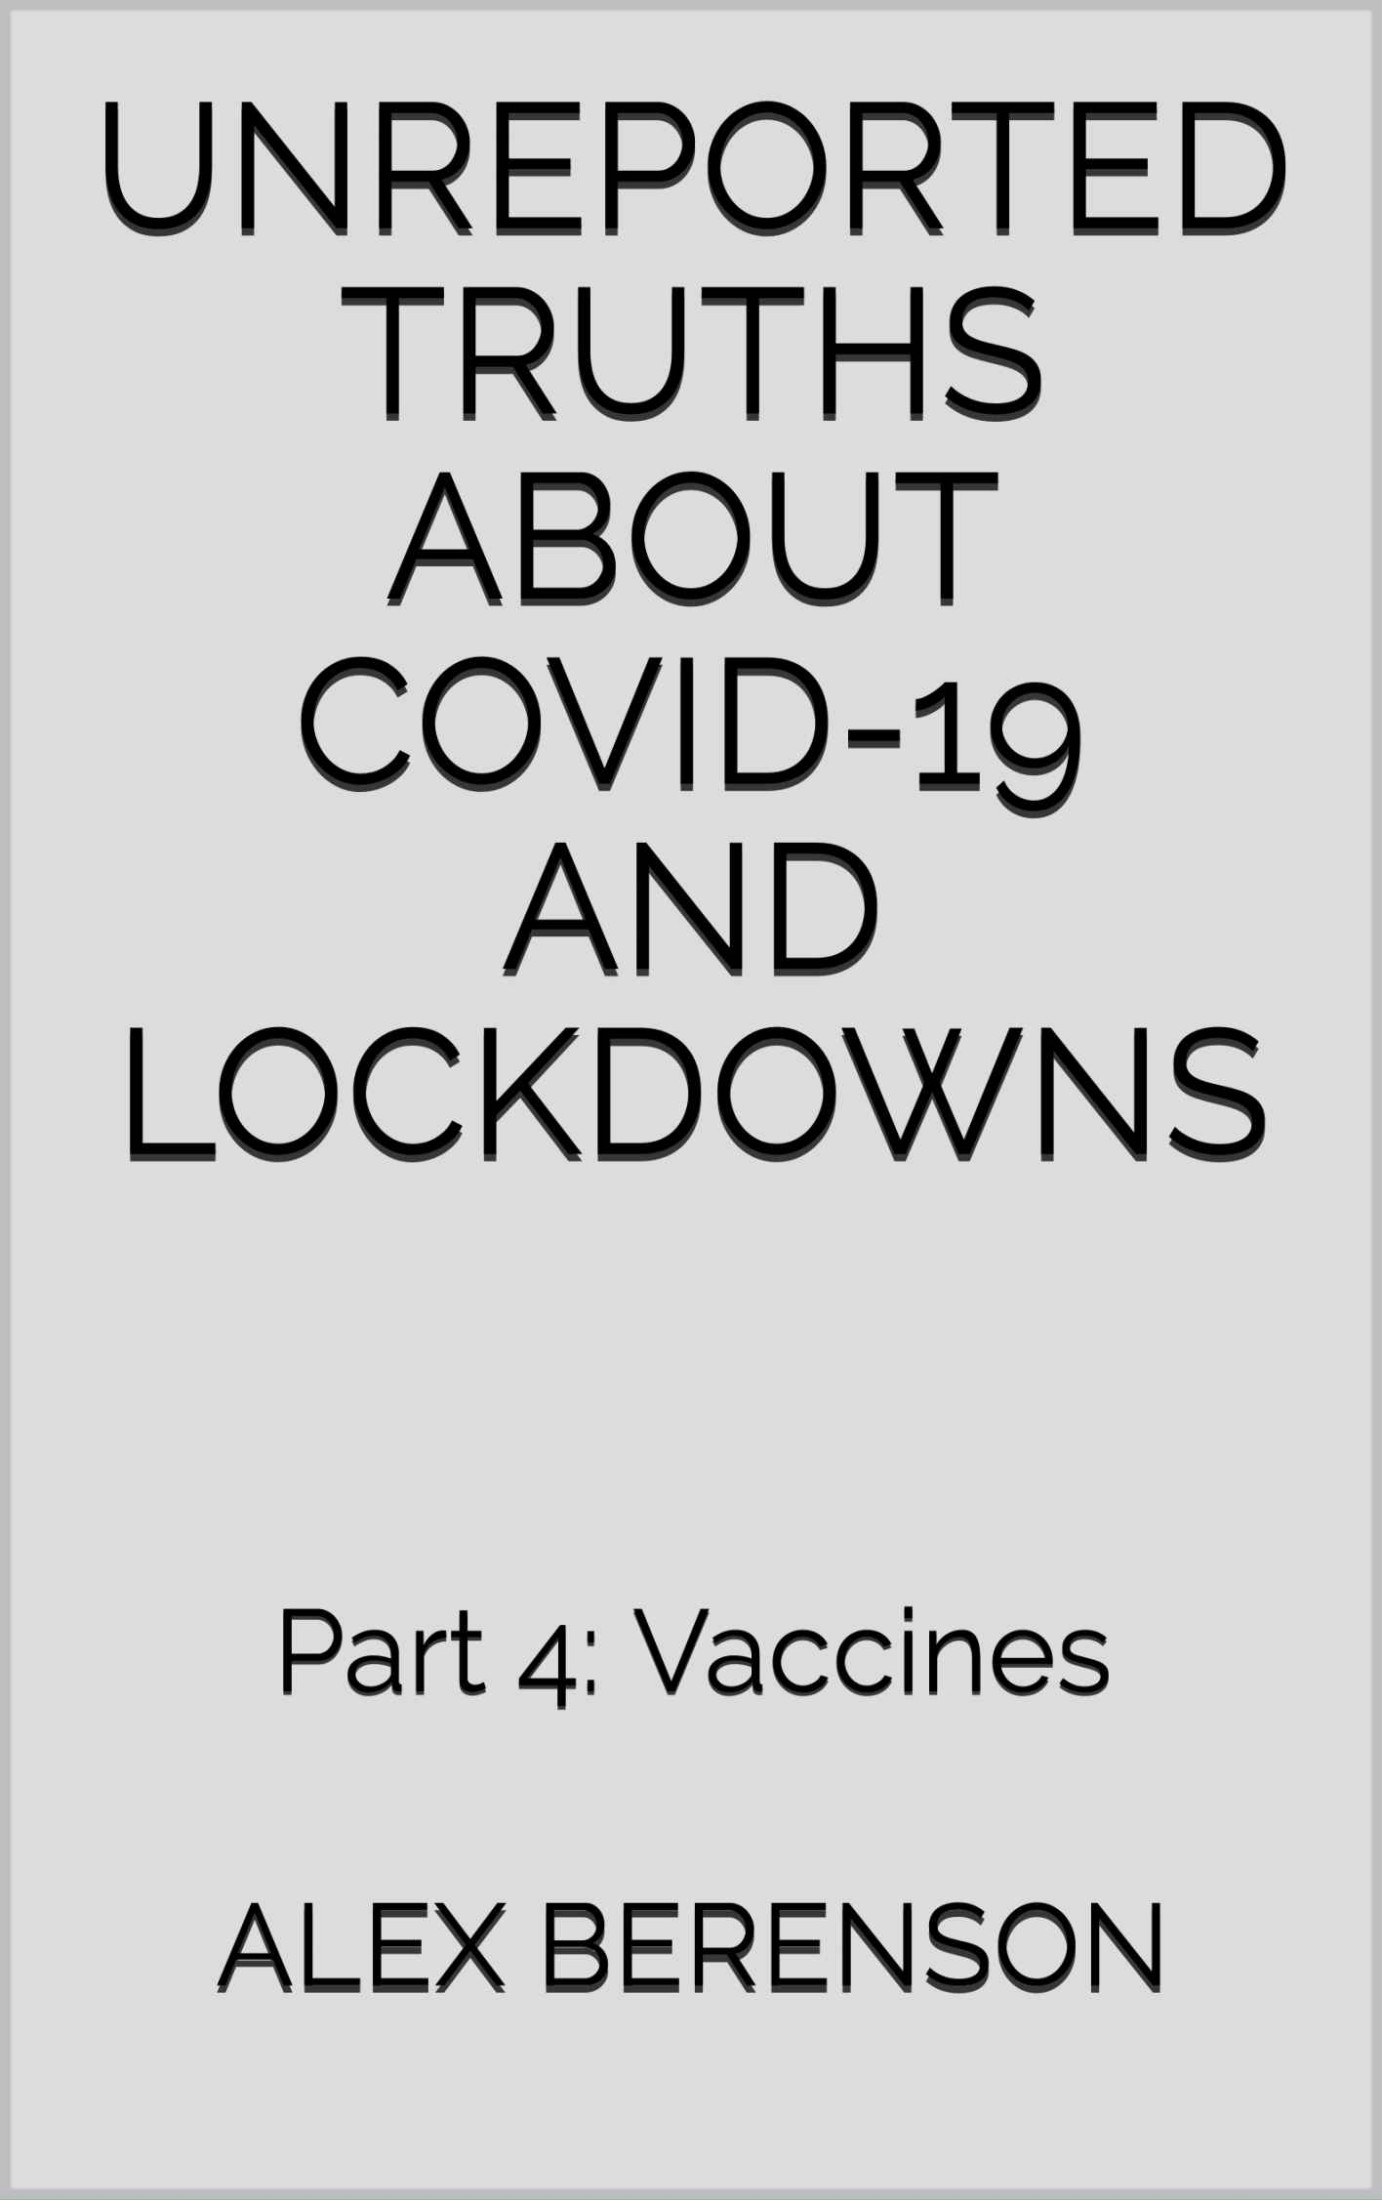 Unreported Truths About Covid-19 and Lockdowns: Part 4: Vaccines